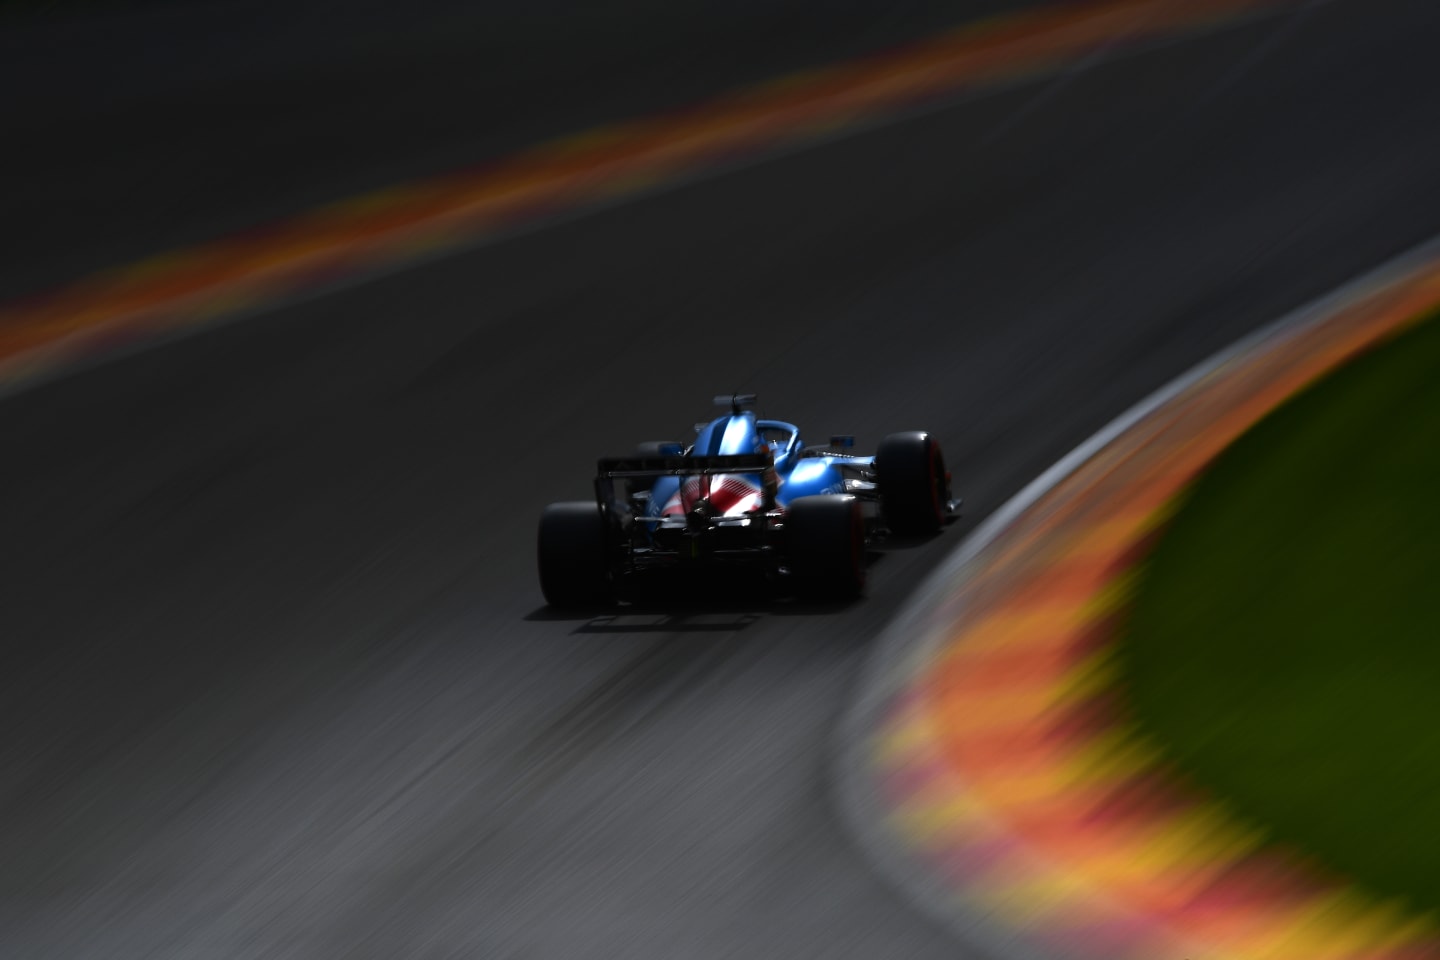 SPA, BELGIUM - AUGUST 27: Fernando Alonso of Spain driving the (14) Alpine A521 Renault during practice ahead of the F1 Grand Prix of Belgium at Circuit de Spa-Francorchamps on August 27, 2021 in Spa, Belgium. (Photo by Mario Renzi - Formula 1/Formula 1 via Getty Images)